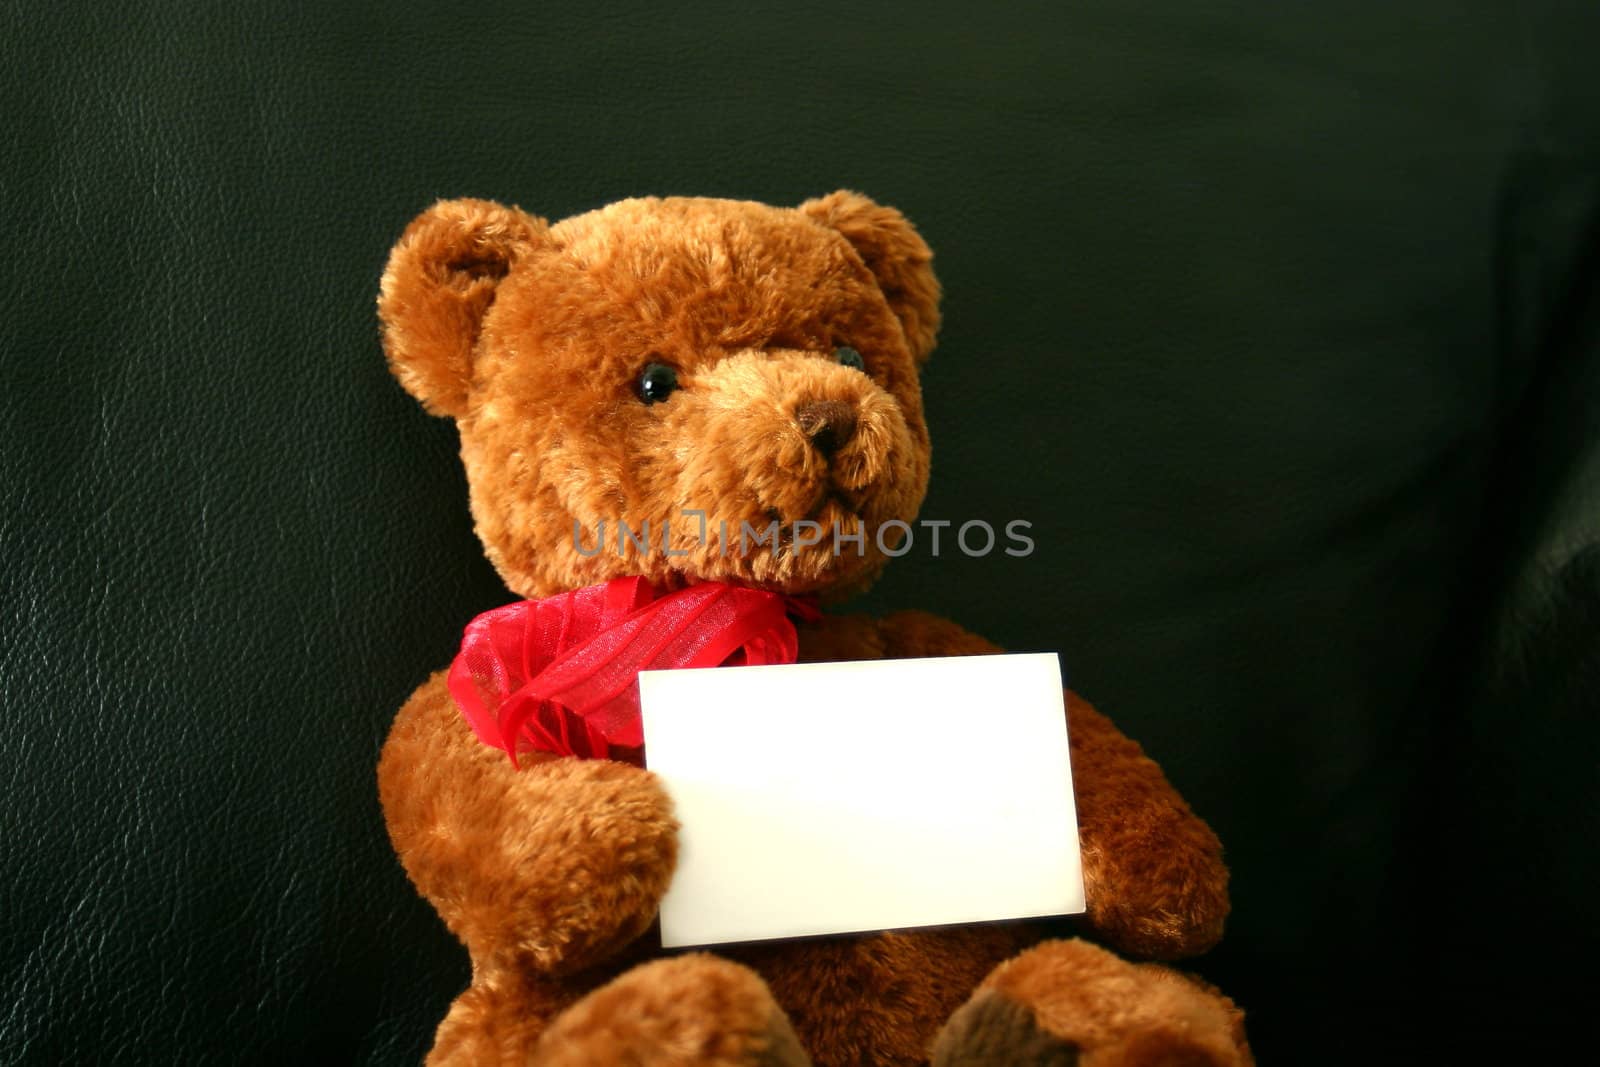 Soft brown teddy bear on a black leather couch with a red heart and red neckerchief holding a business card.